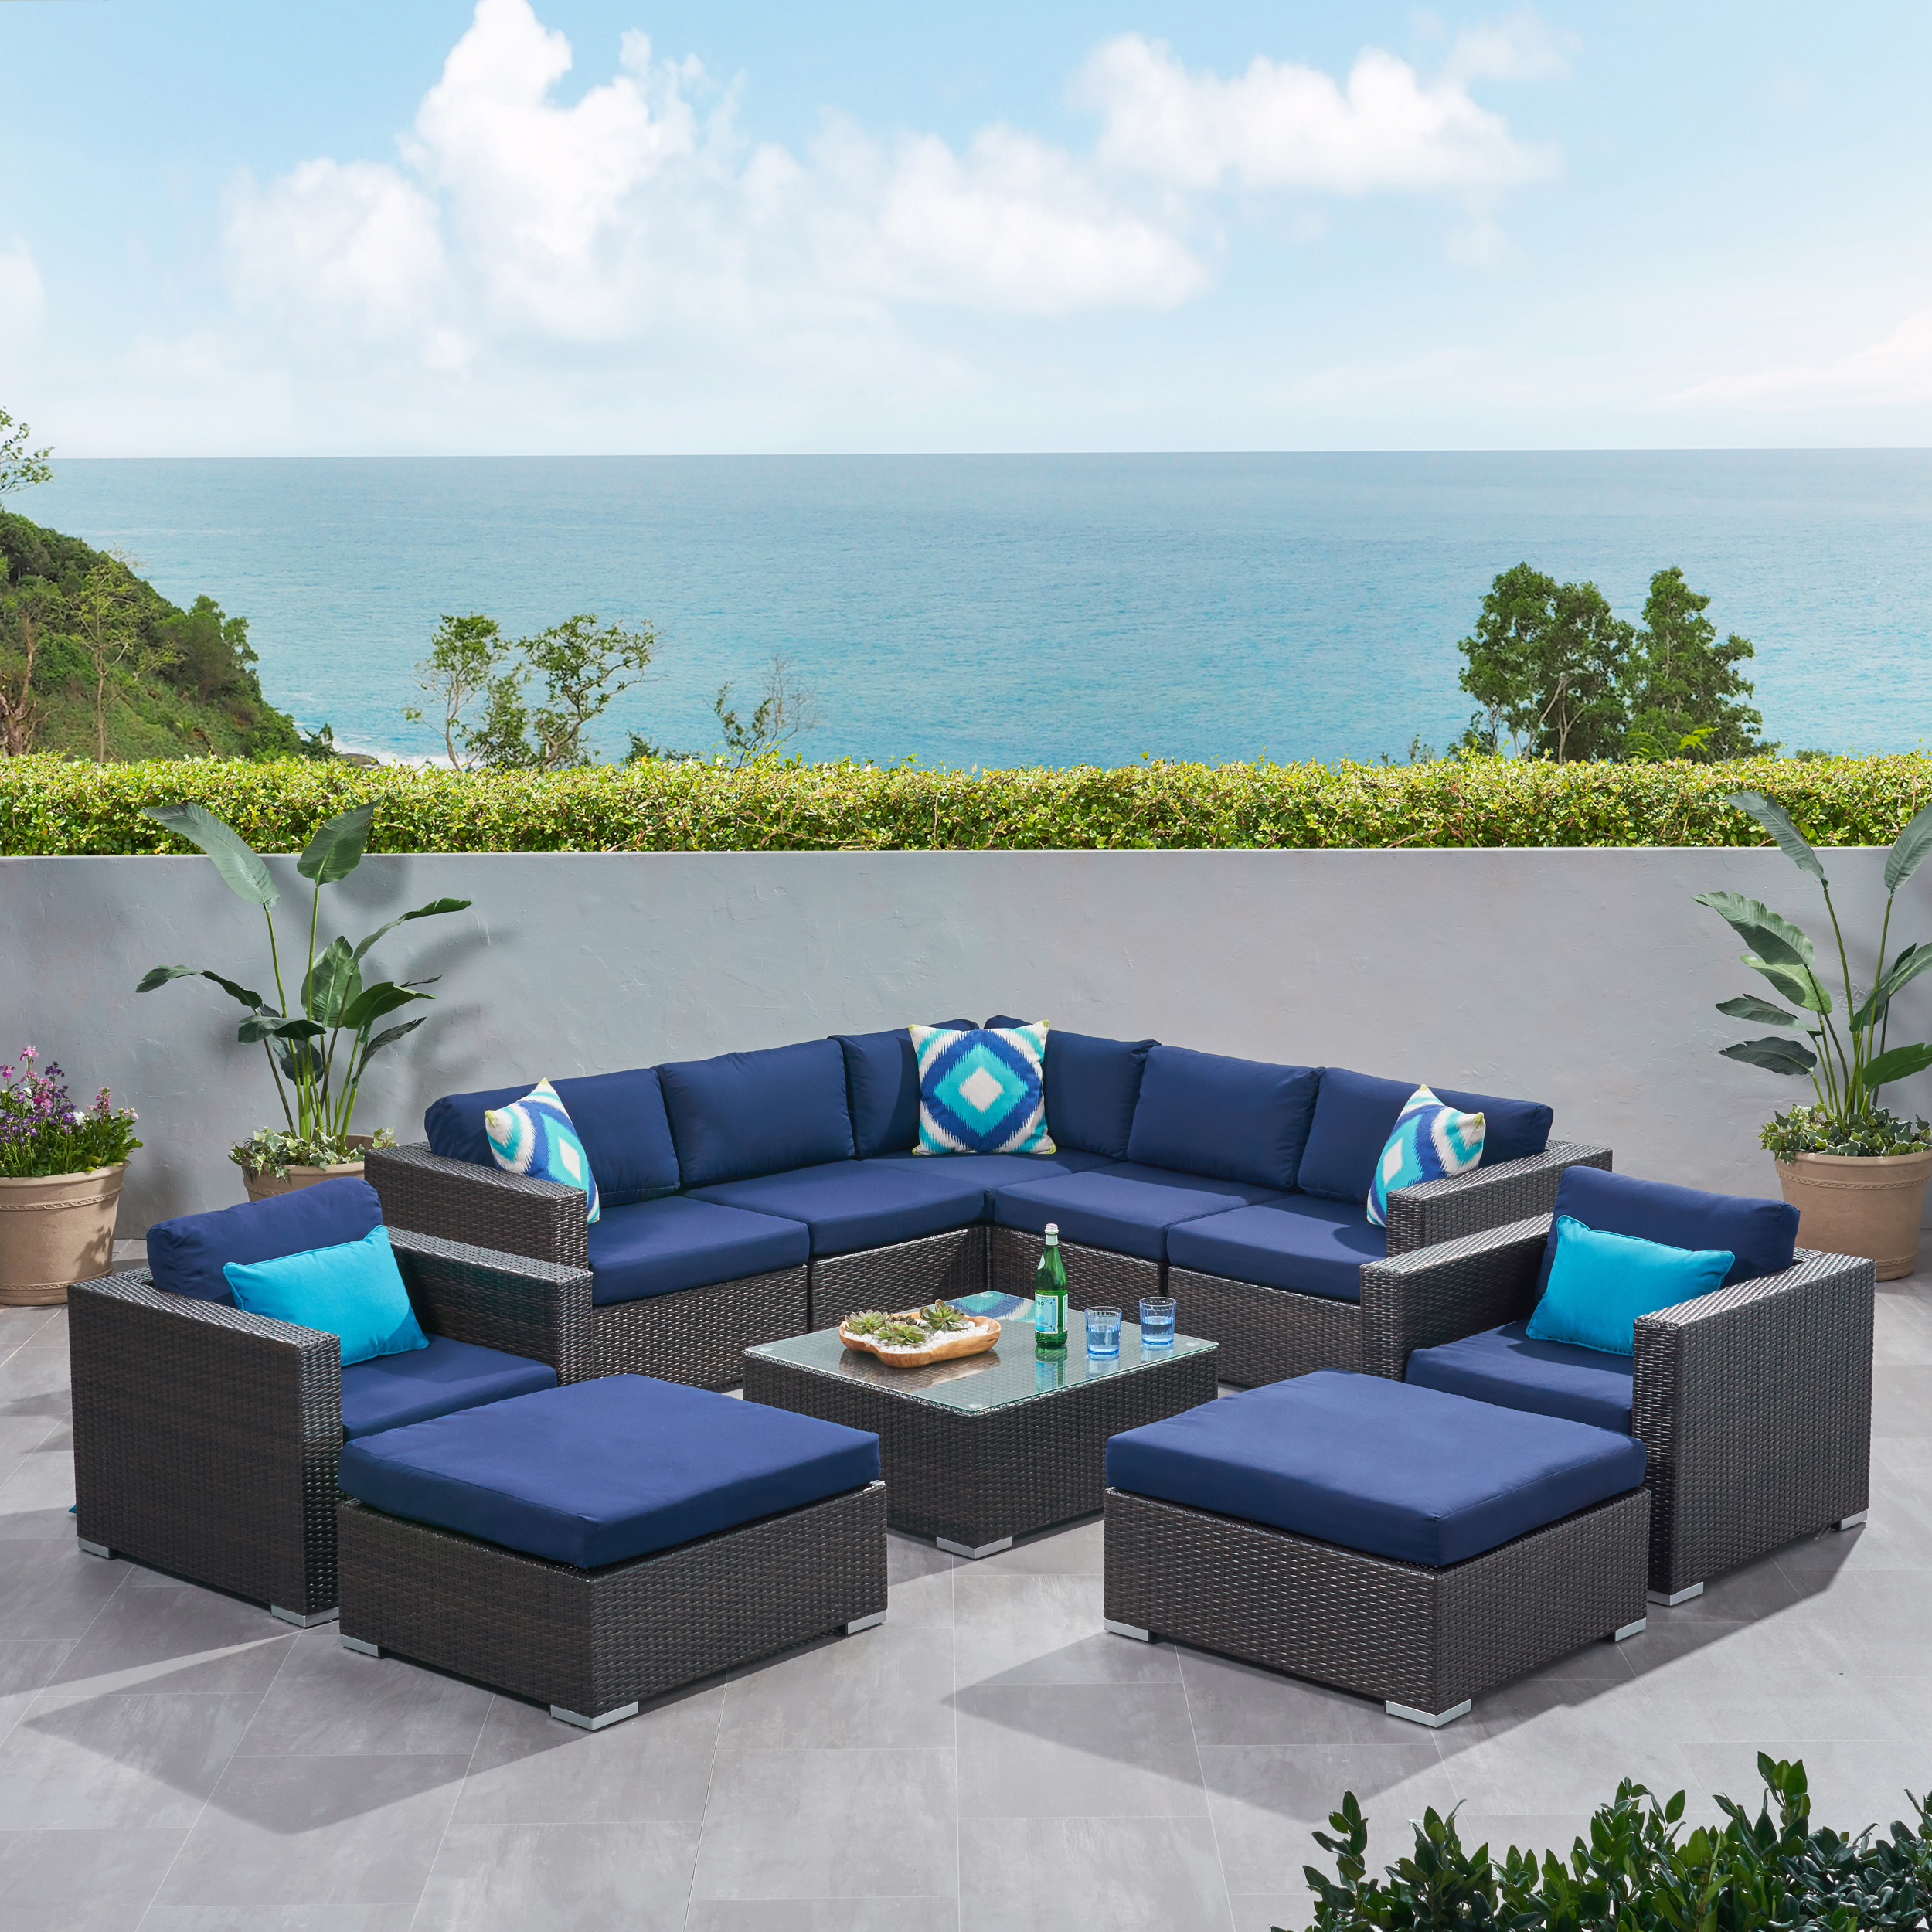 Faviola Outdoor 7 Seater Wicker Sectional Sofa Set with Sunbrella Cushions, Multibrown and Sunbrella Canvas Navy - image 1 of 10